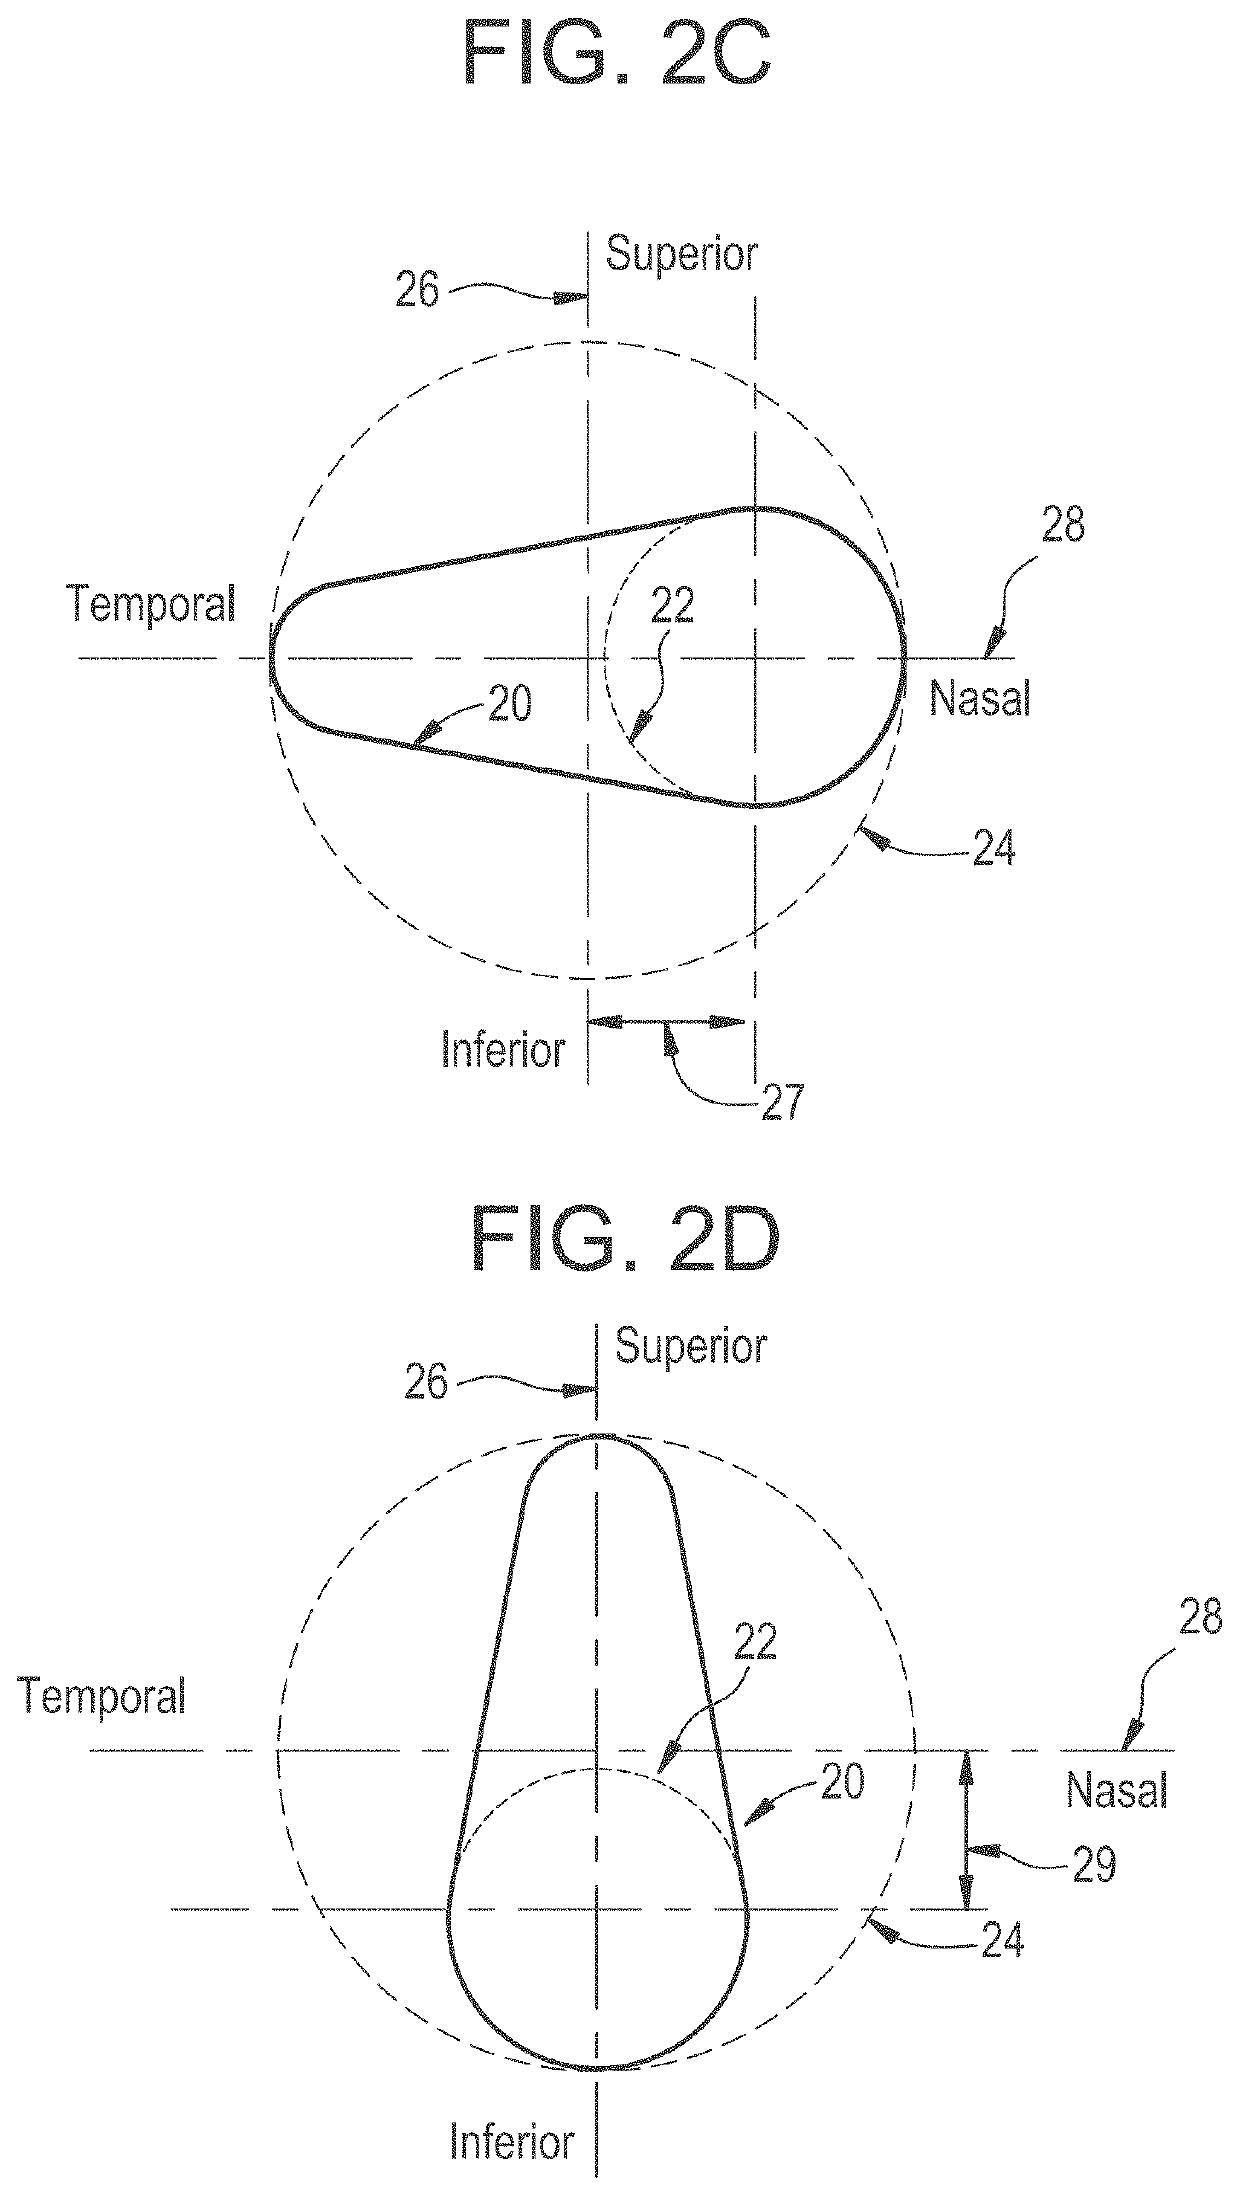 Rotationally stabilized contact lens with improved comfort and improved stabilization utilizing optimized stiffness profiles